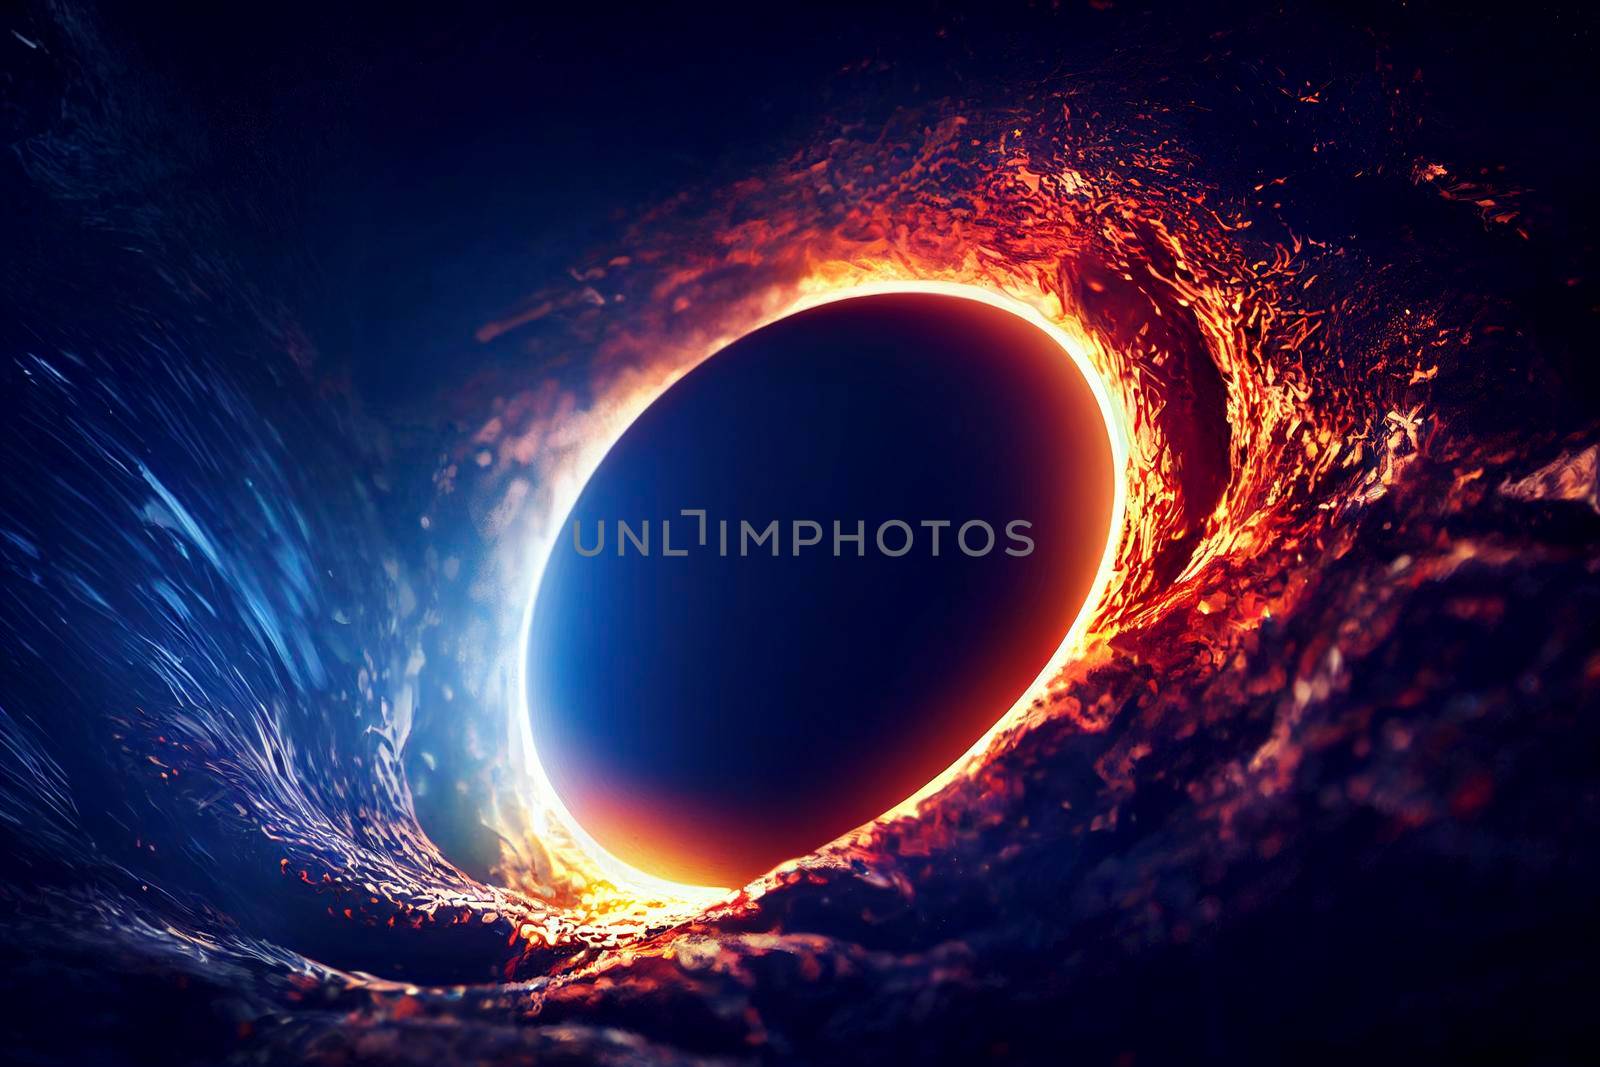 Black hole Slowly rotating in Space. The event horizon of black hole